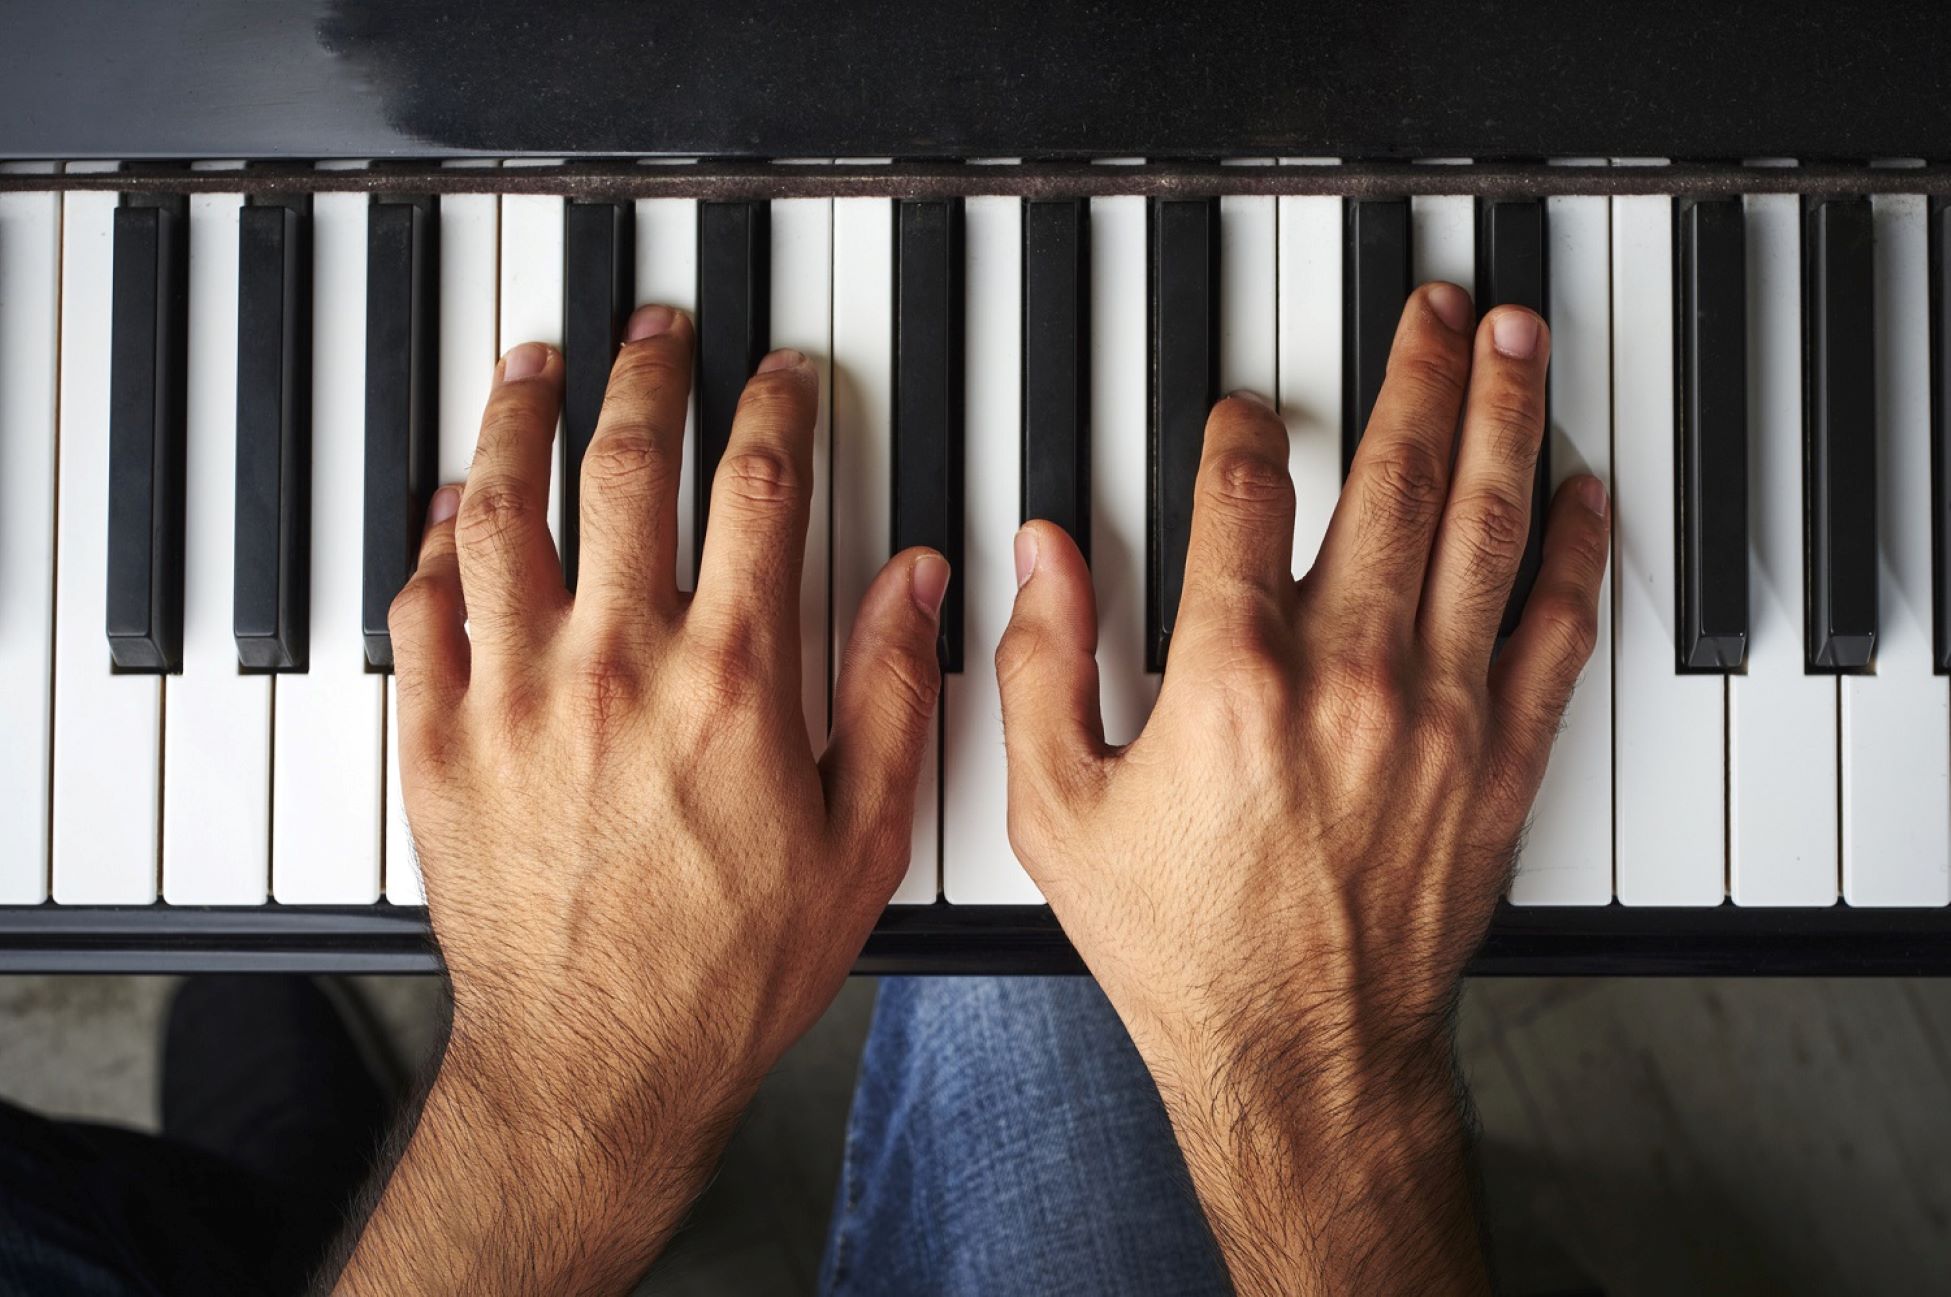 How To Place Hands On Keyboard Piano